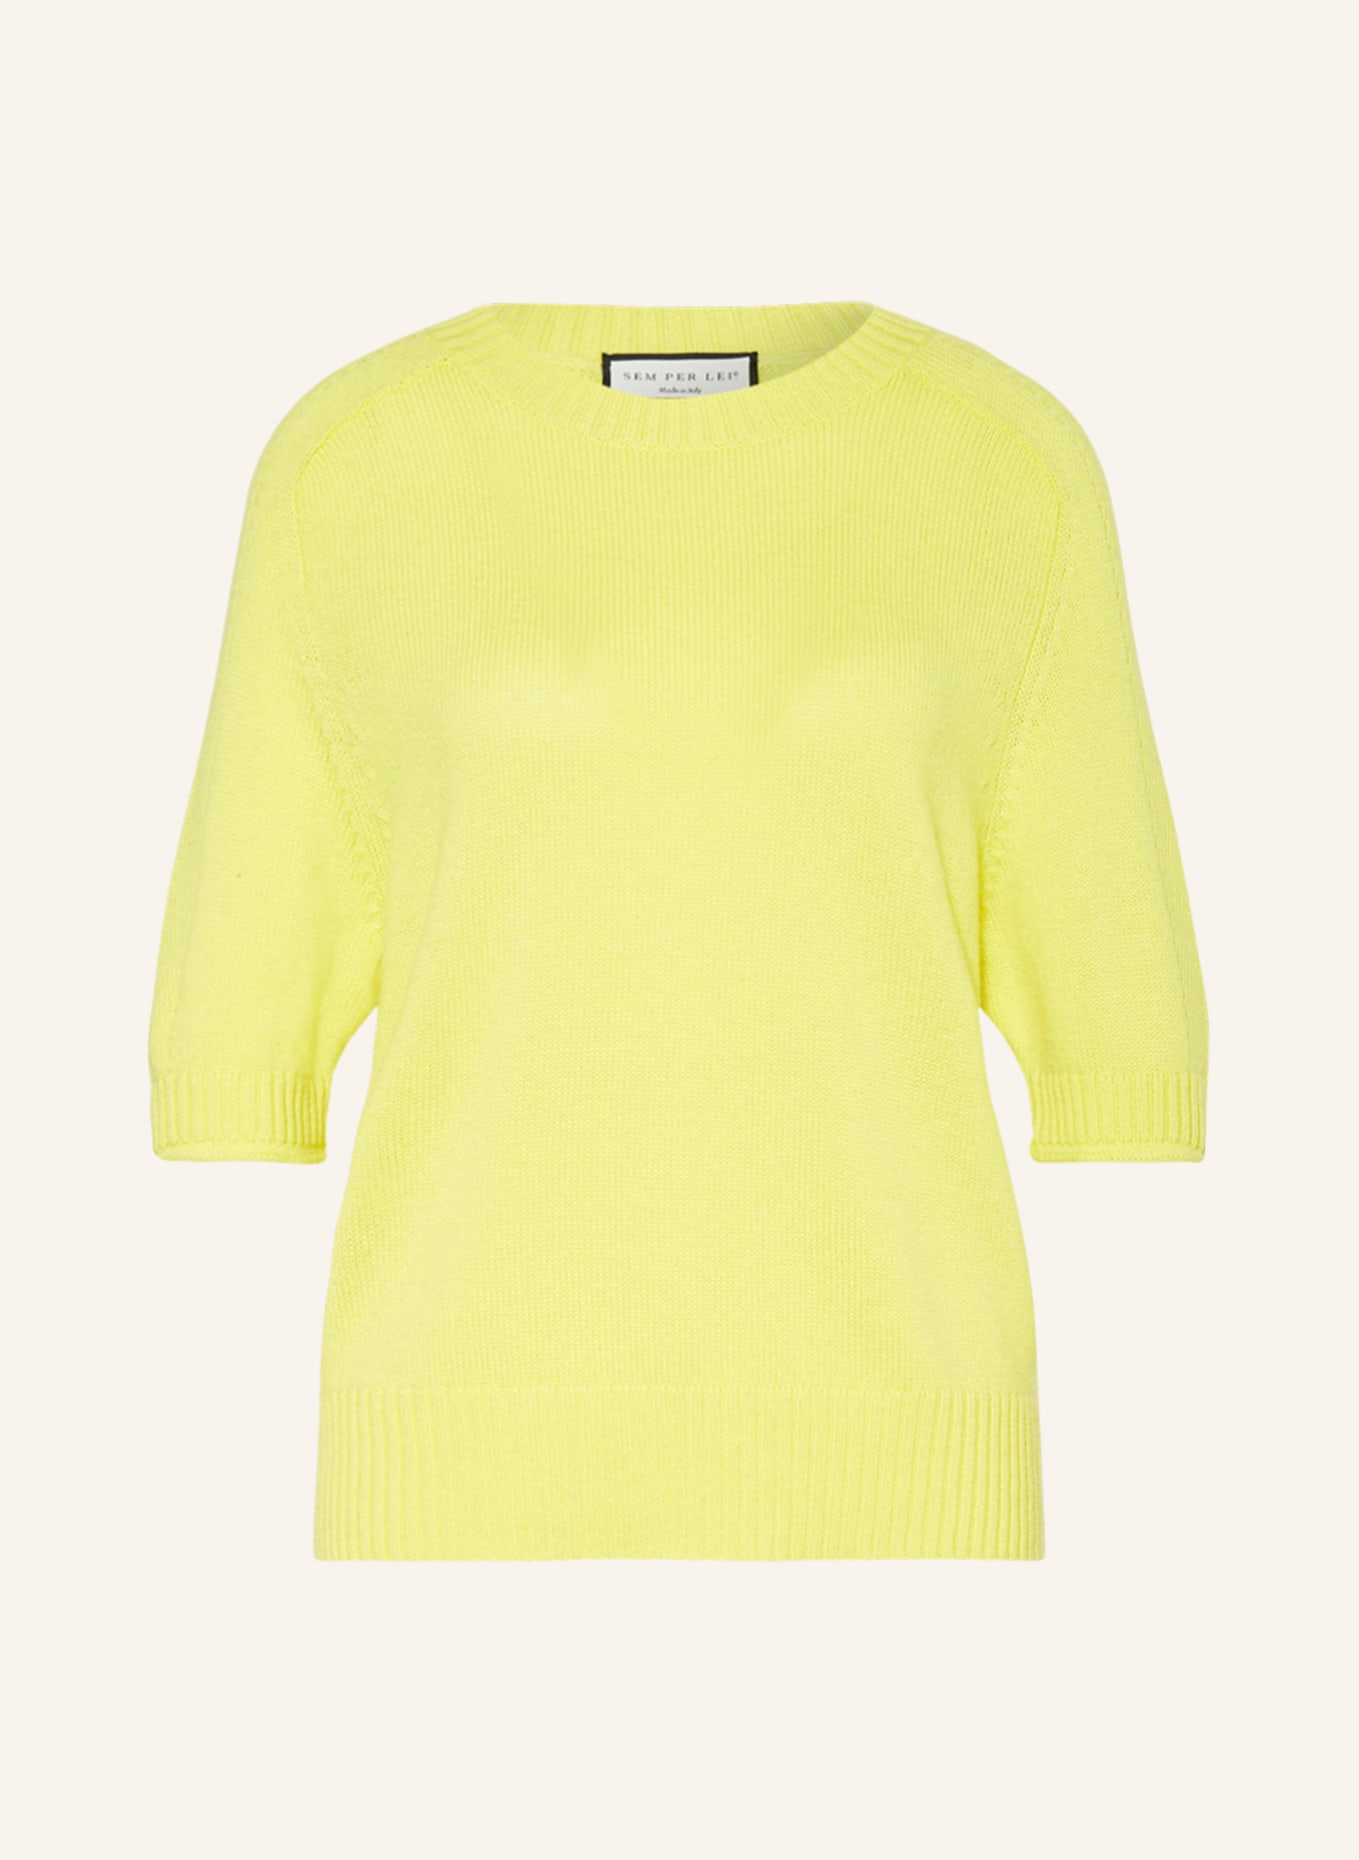 SEM PER LEI Knit shirt with cashmere, Color: YELLOW (Image 1)